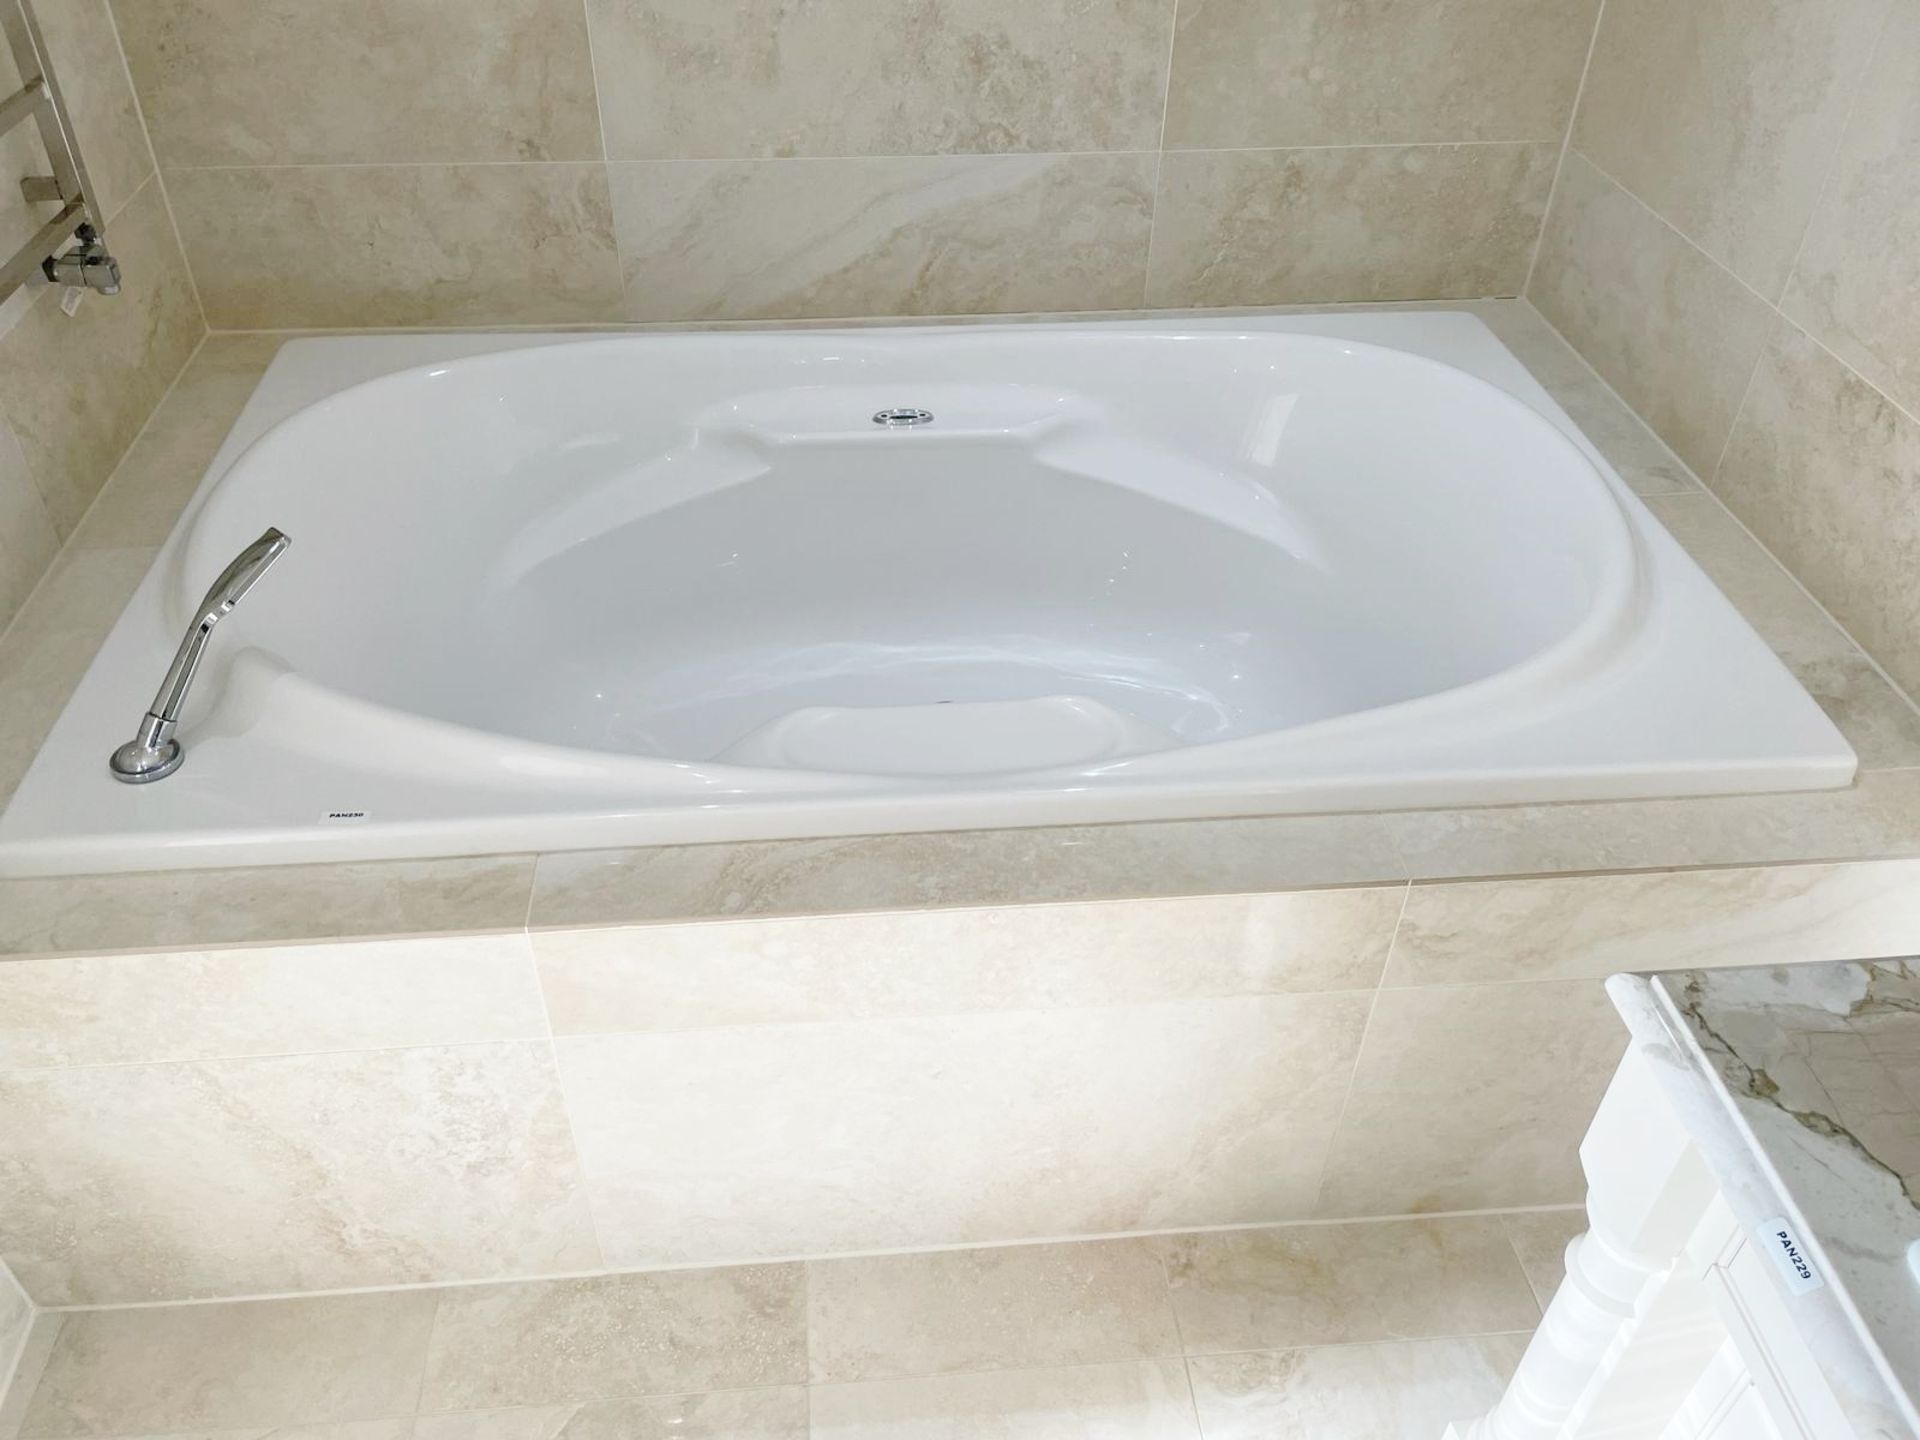 1 x AIRBATH Large Jacuzzi Spa Bath, with Axor Thermostat  - Ref: PAN230 Bed1/bth - CL896 - NO VAT - Image 2 of 20